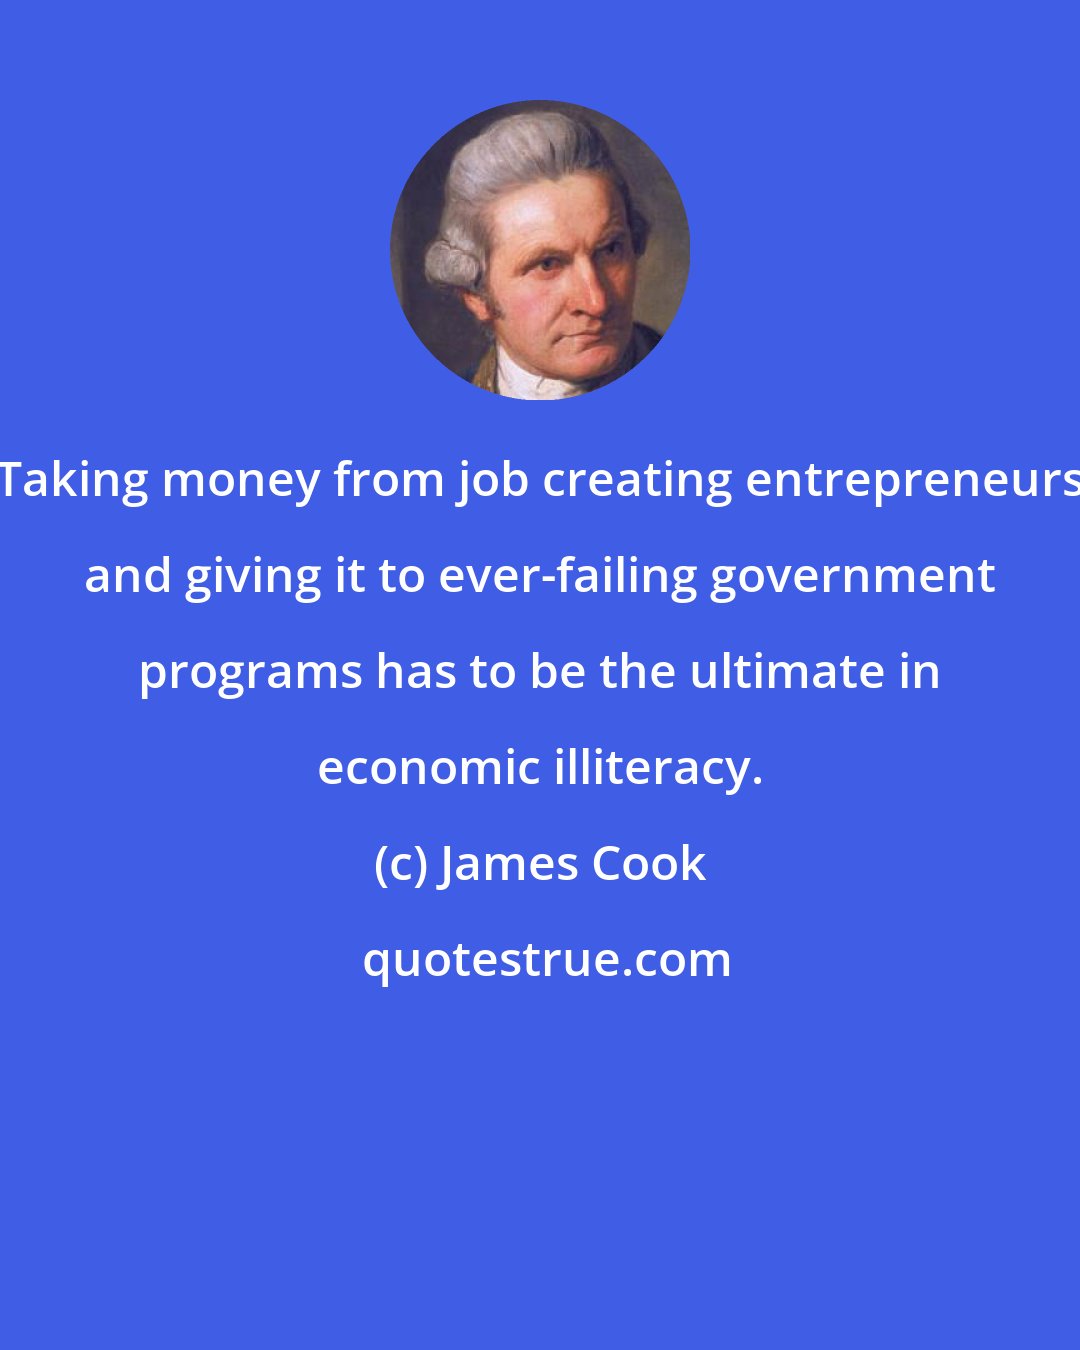 James Cook: Taking money from job creating entrepreneurs and giving it to ever-failing government programs has to be the ultimate in economic illiteracy.